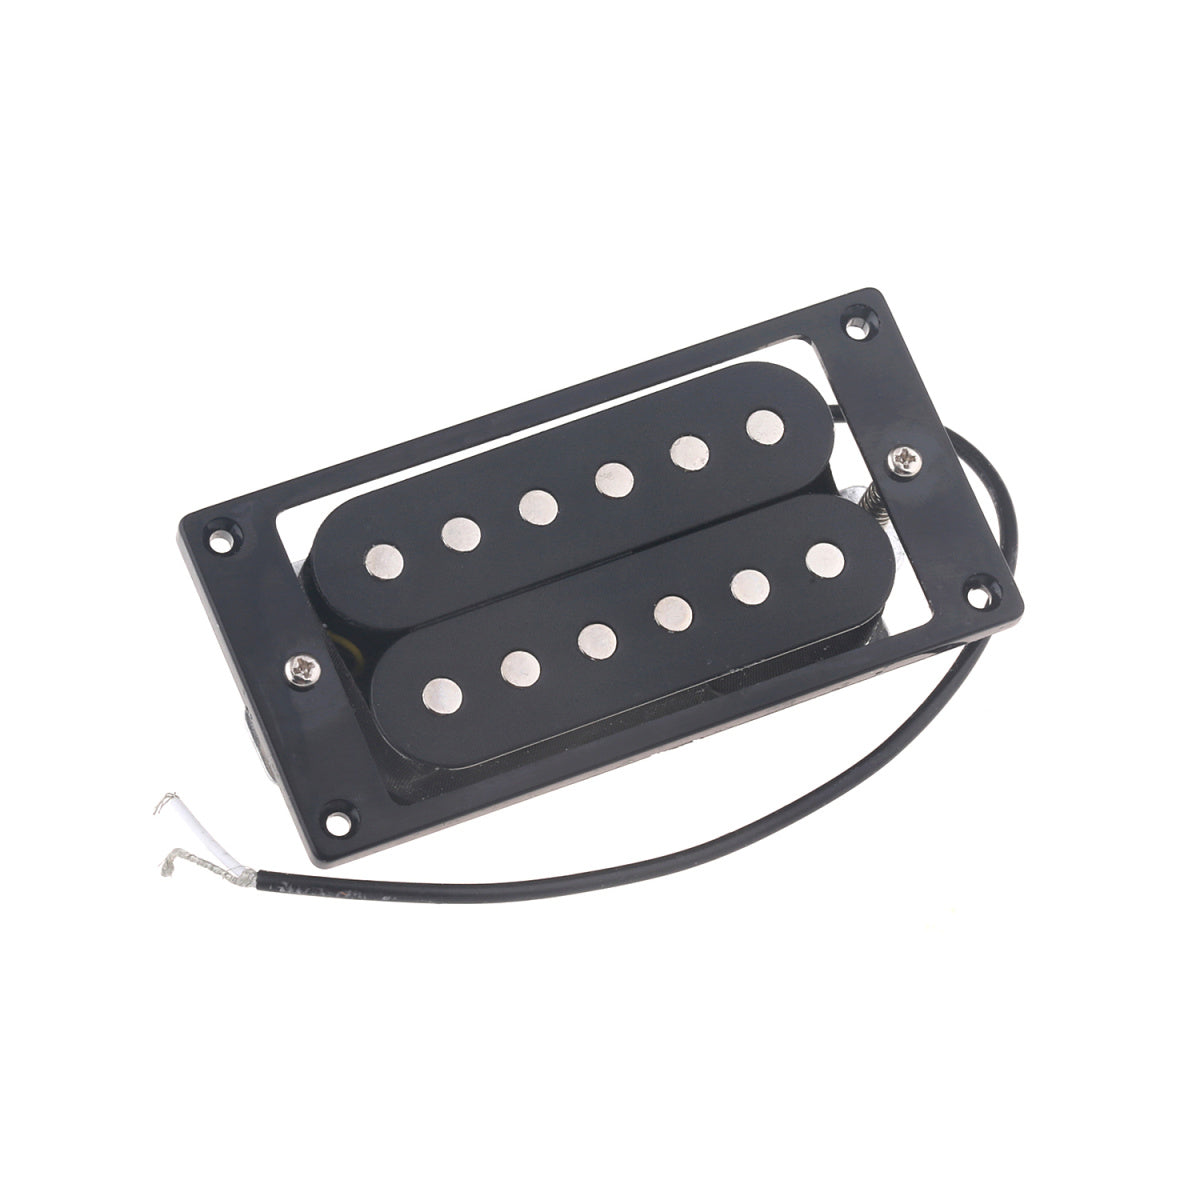 Musiclily 50mm Humbucker Pickup for Guitar Neck,Black with Black Pickup Ring